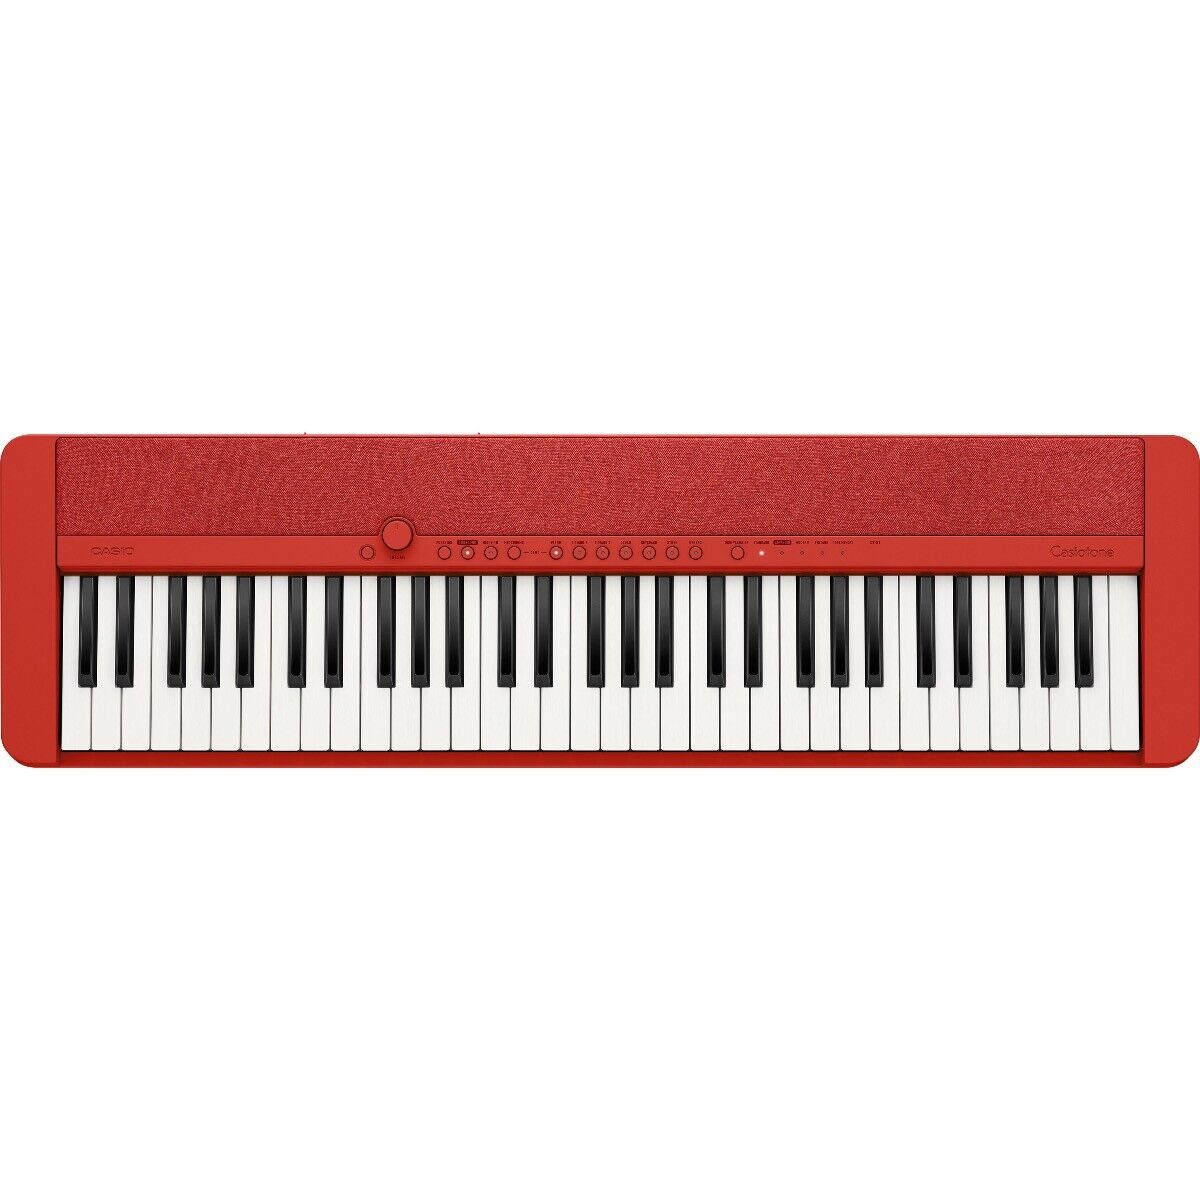 Casio Casiotone CT-S1 Portable Keyboard - Red